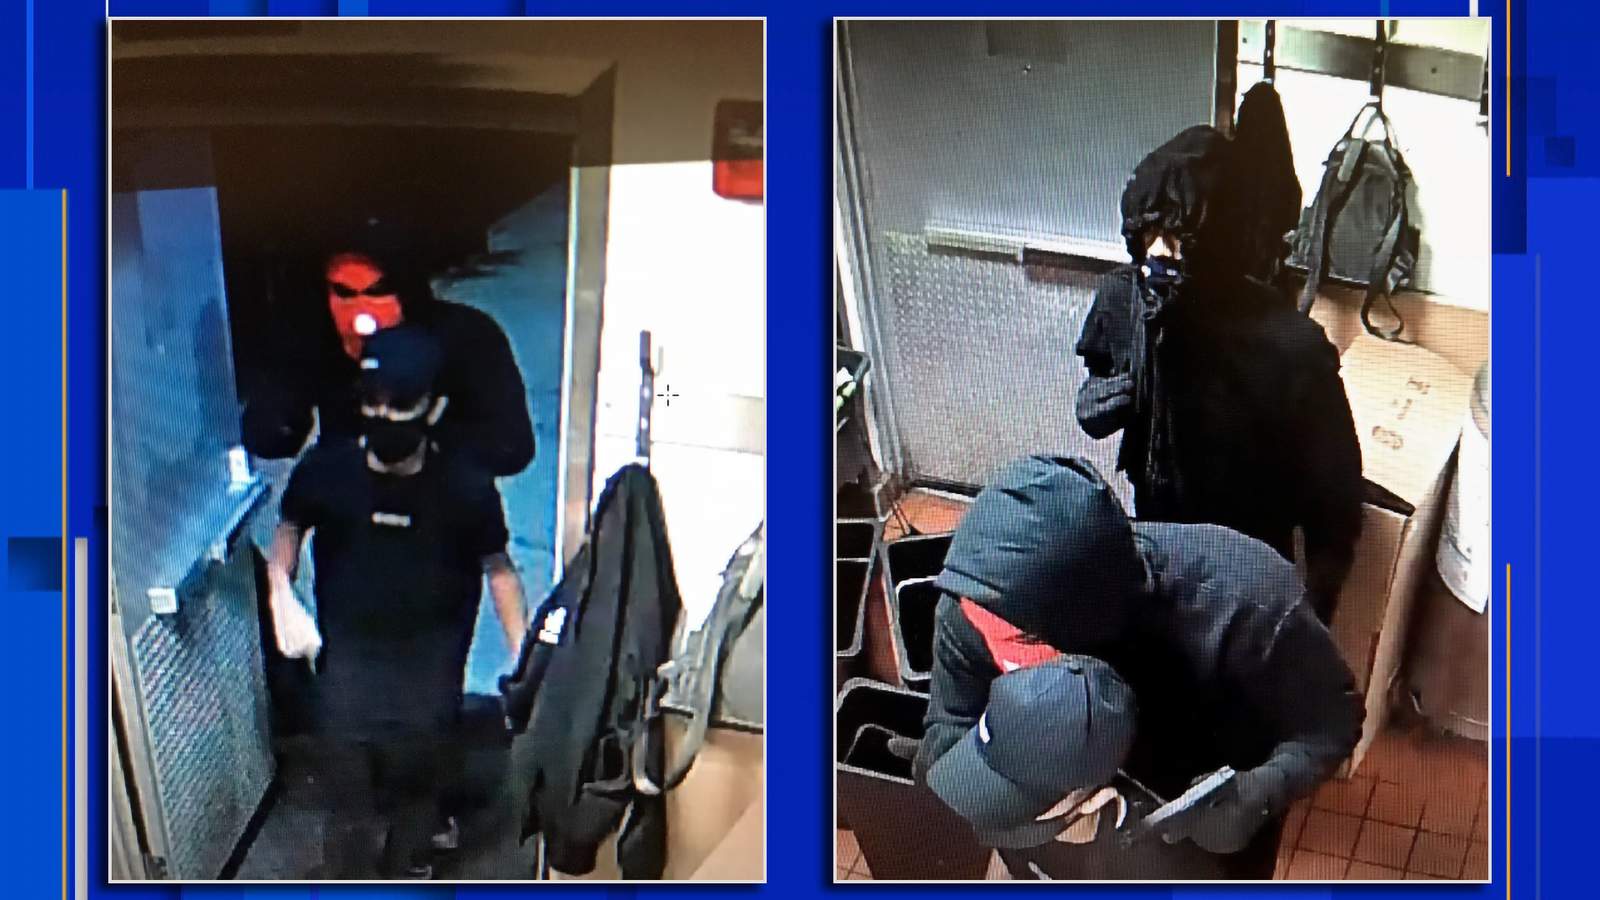 Police seek 2 in connection to armed robbery at Troy Chipotle restaurant